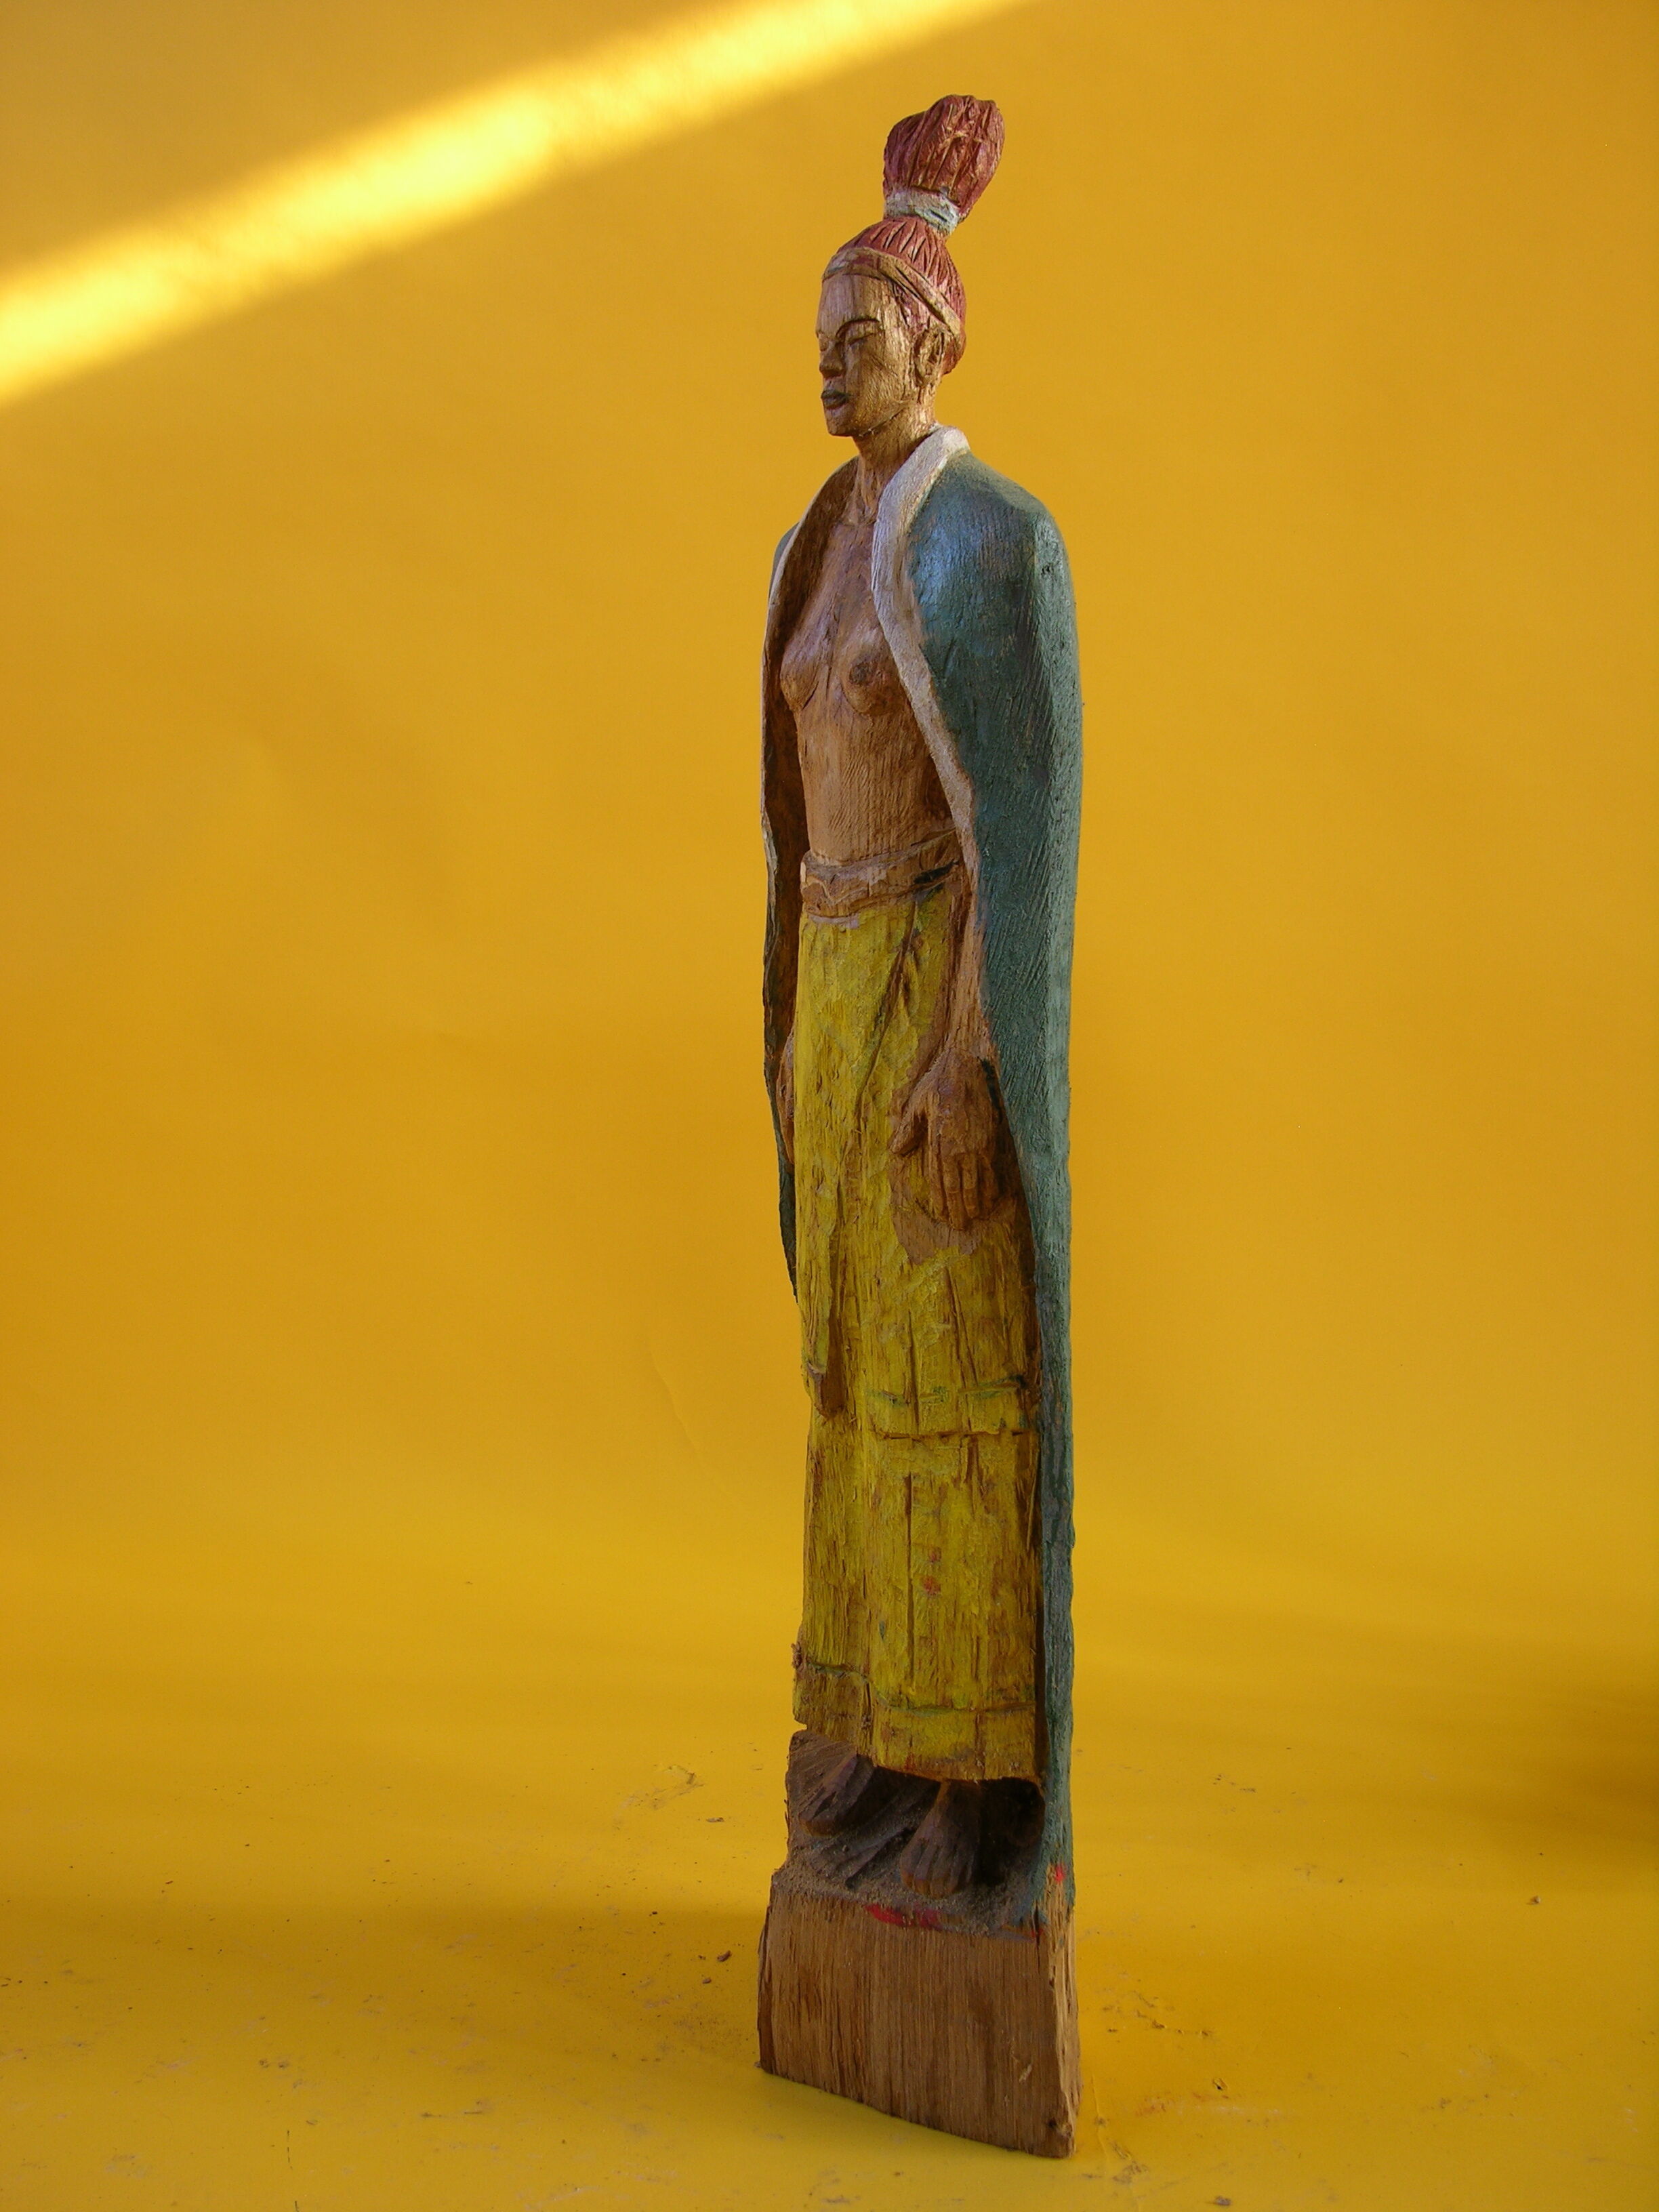 Sculpture "Woman with cape" (2016)